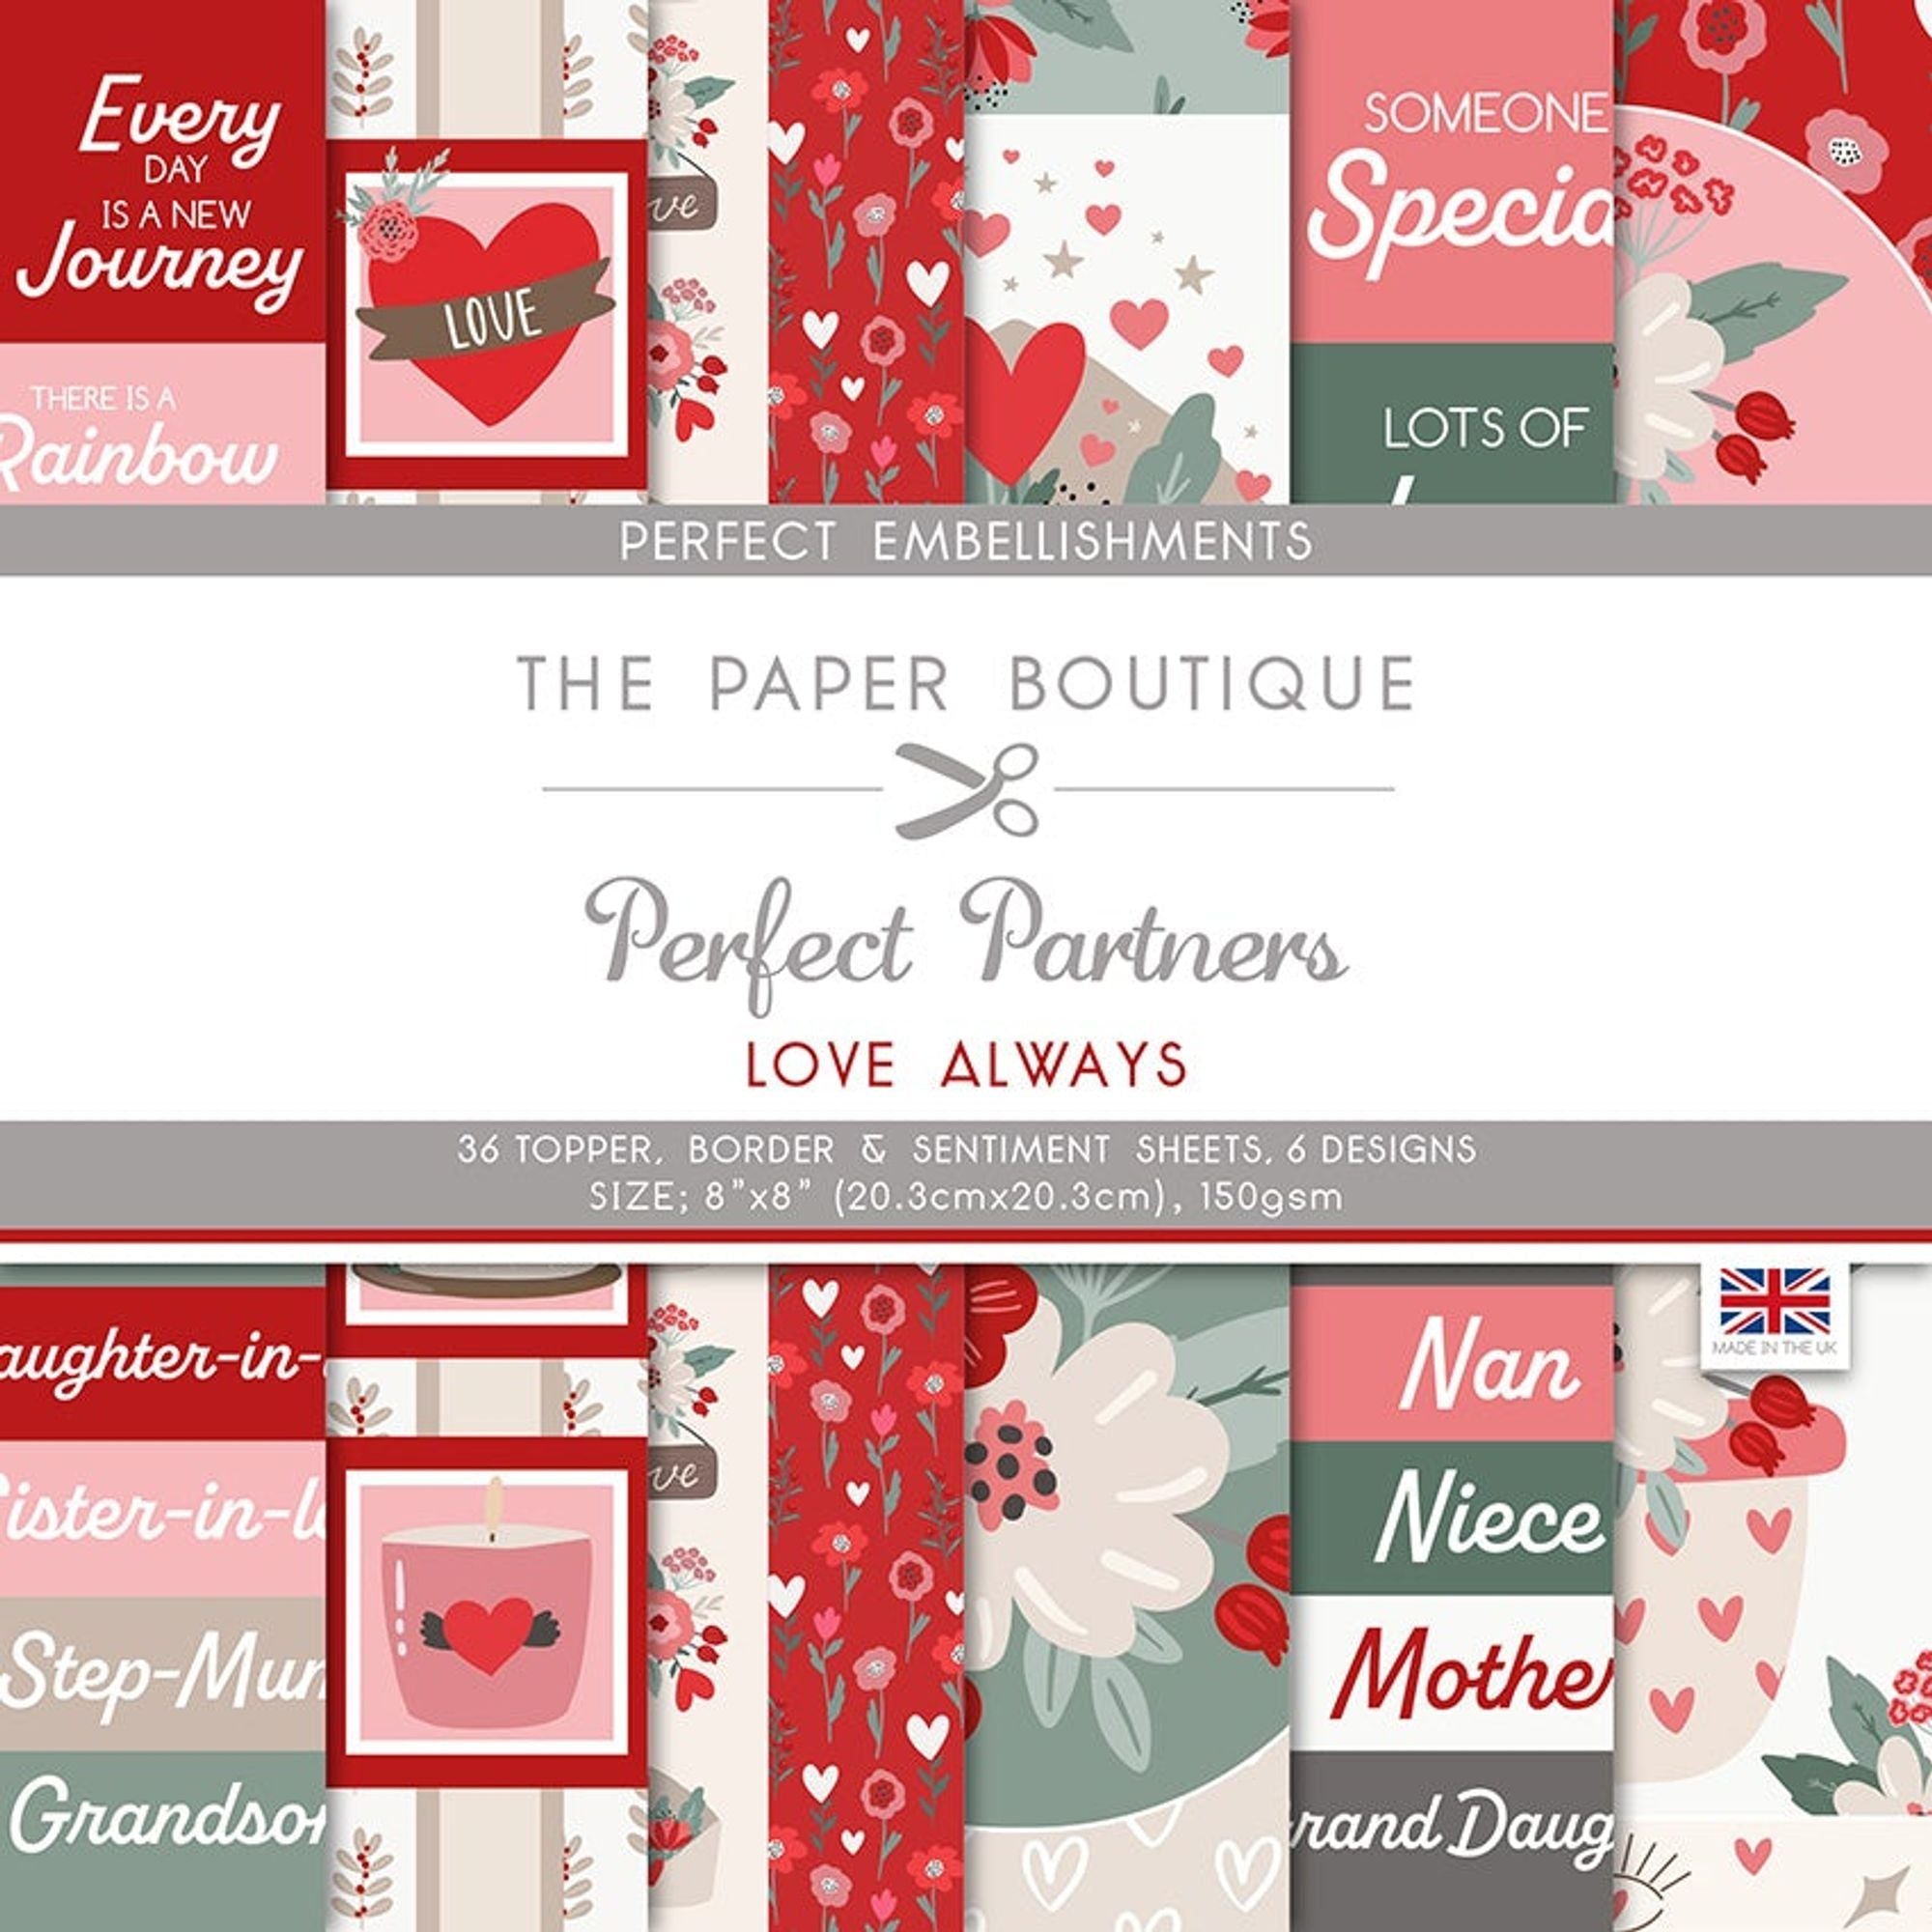 The Paper Boutique Perfect Partners Love Always 8 in x 8 in Embellishments